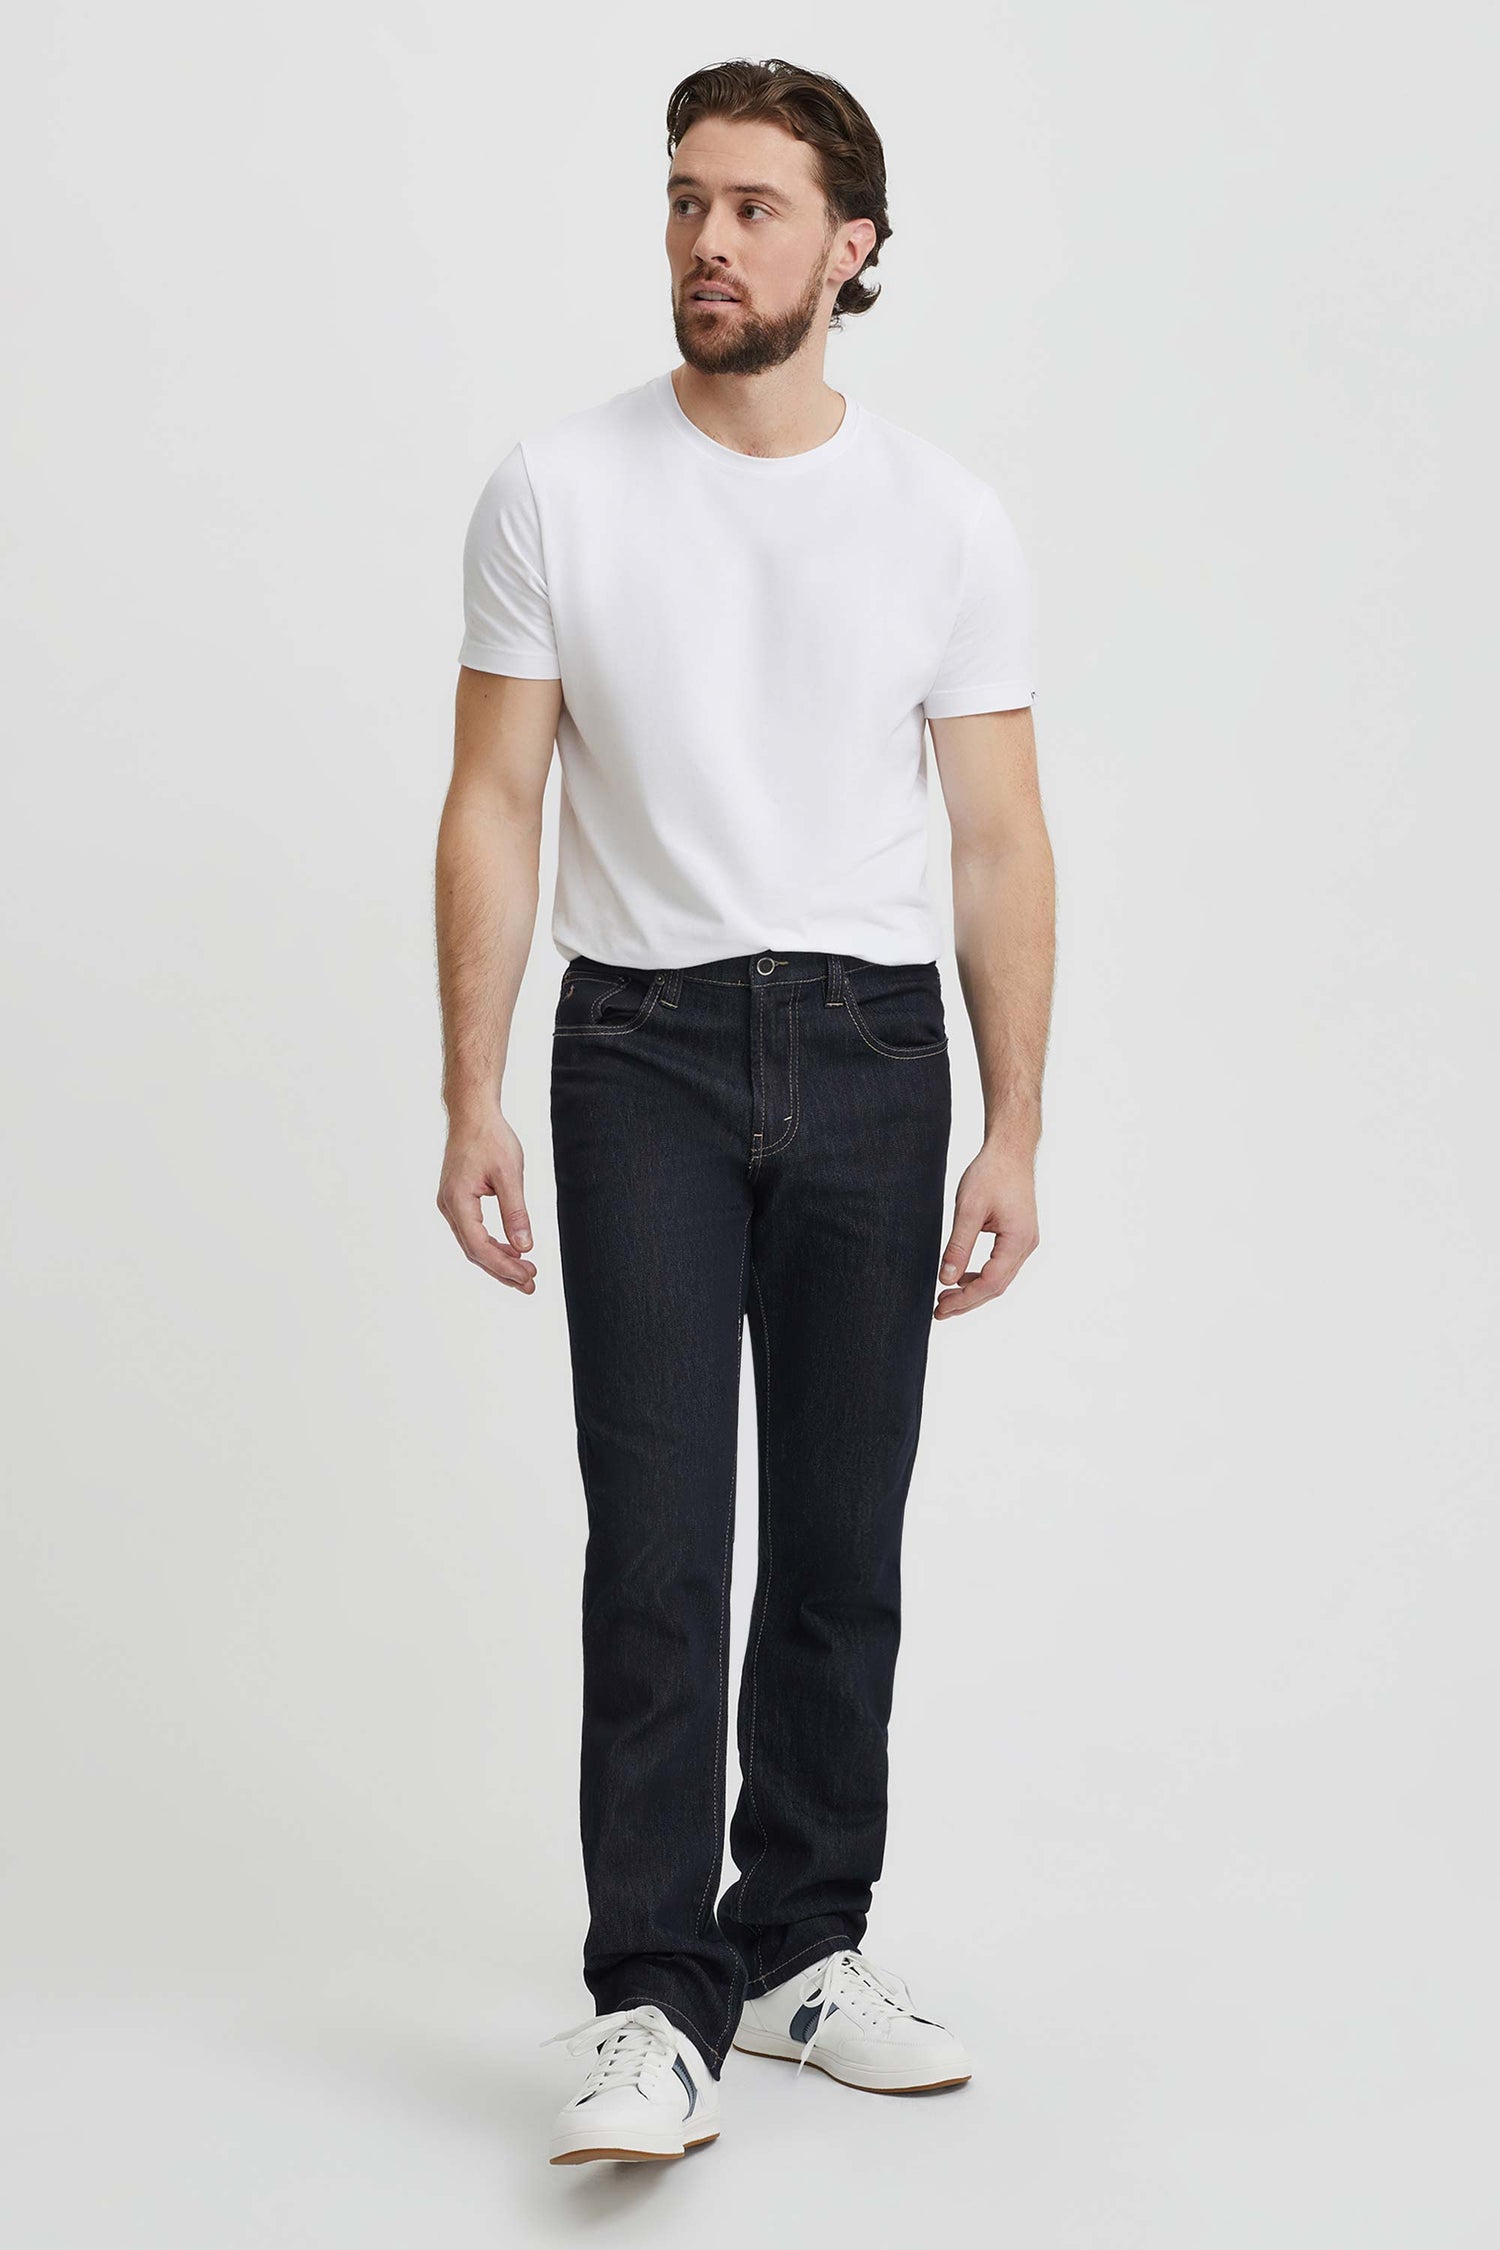 Brad-L jeans with embroidered back pockets